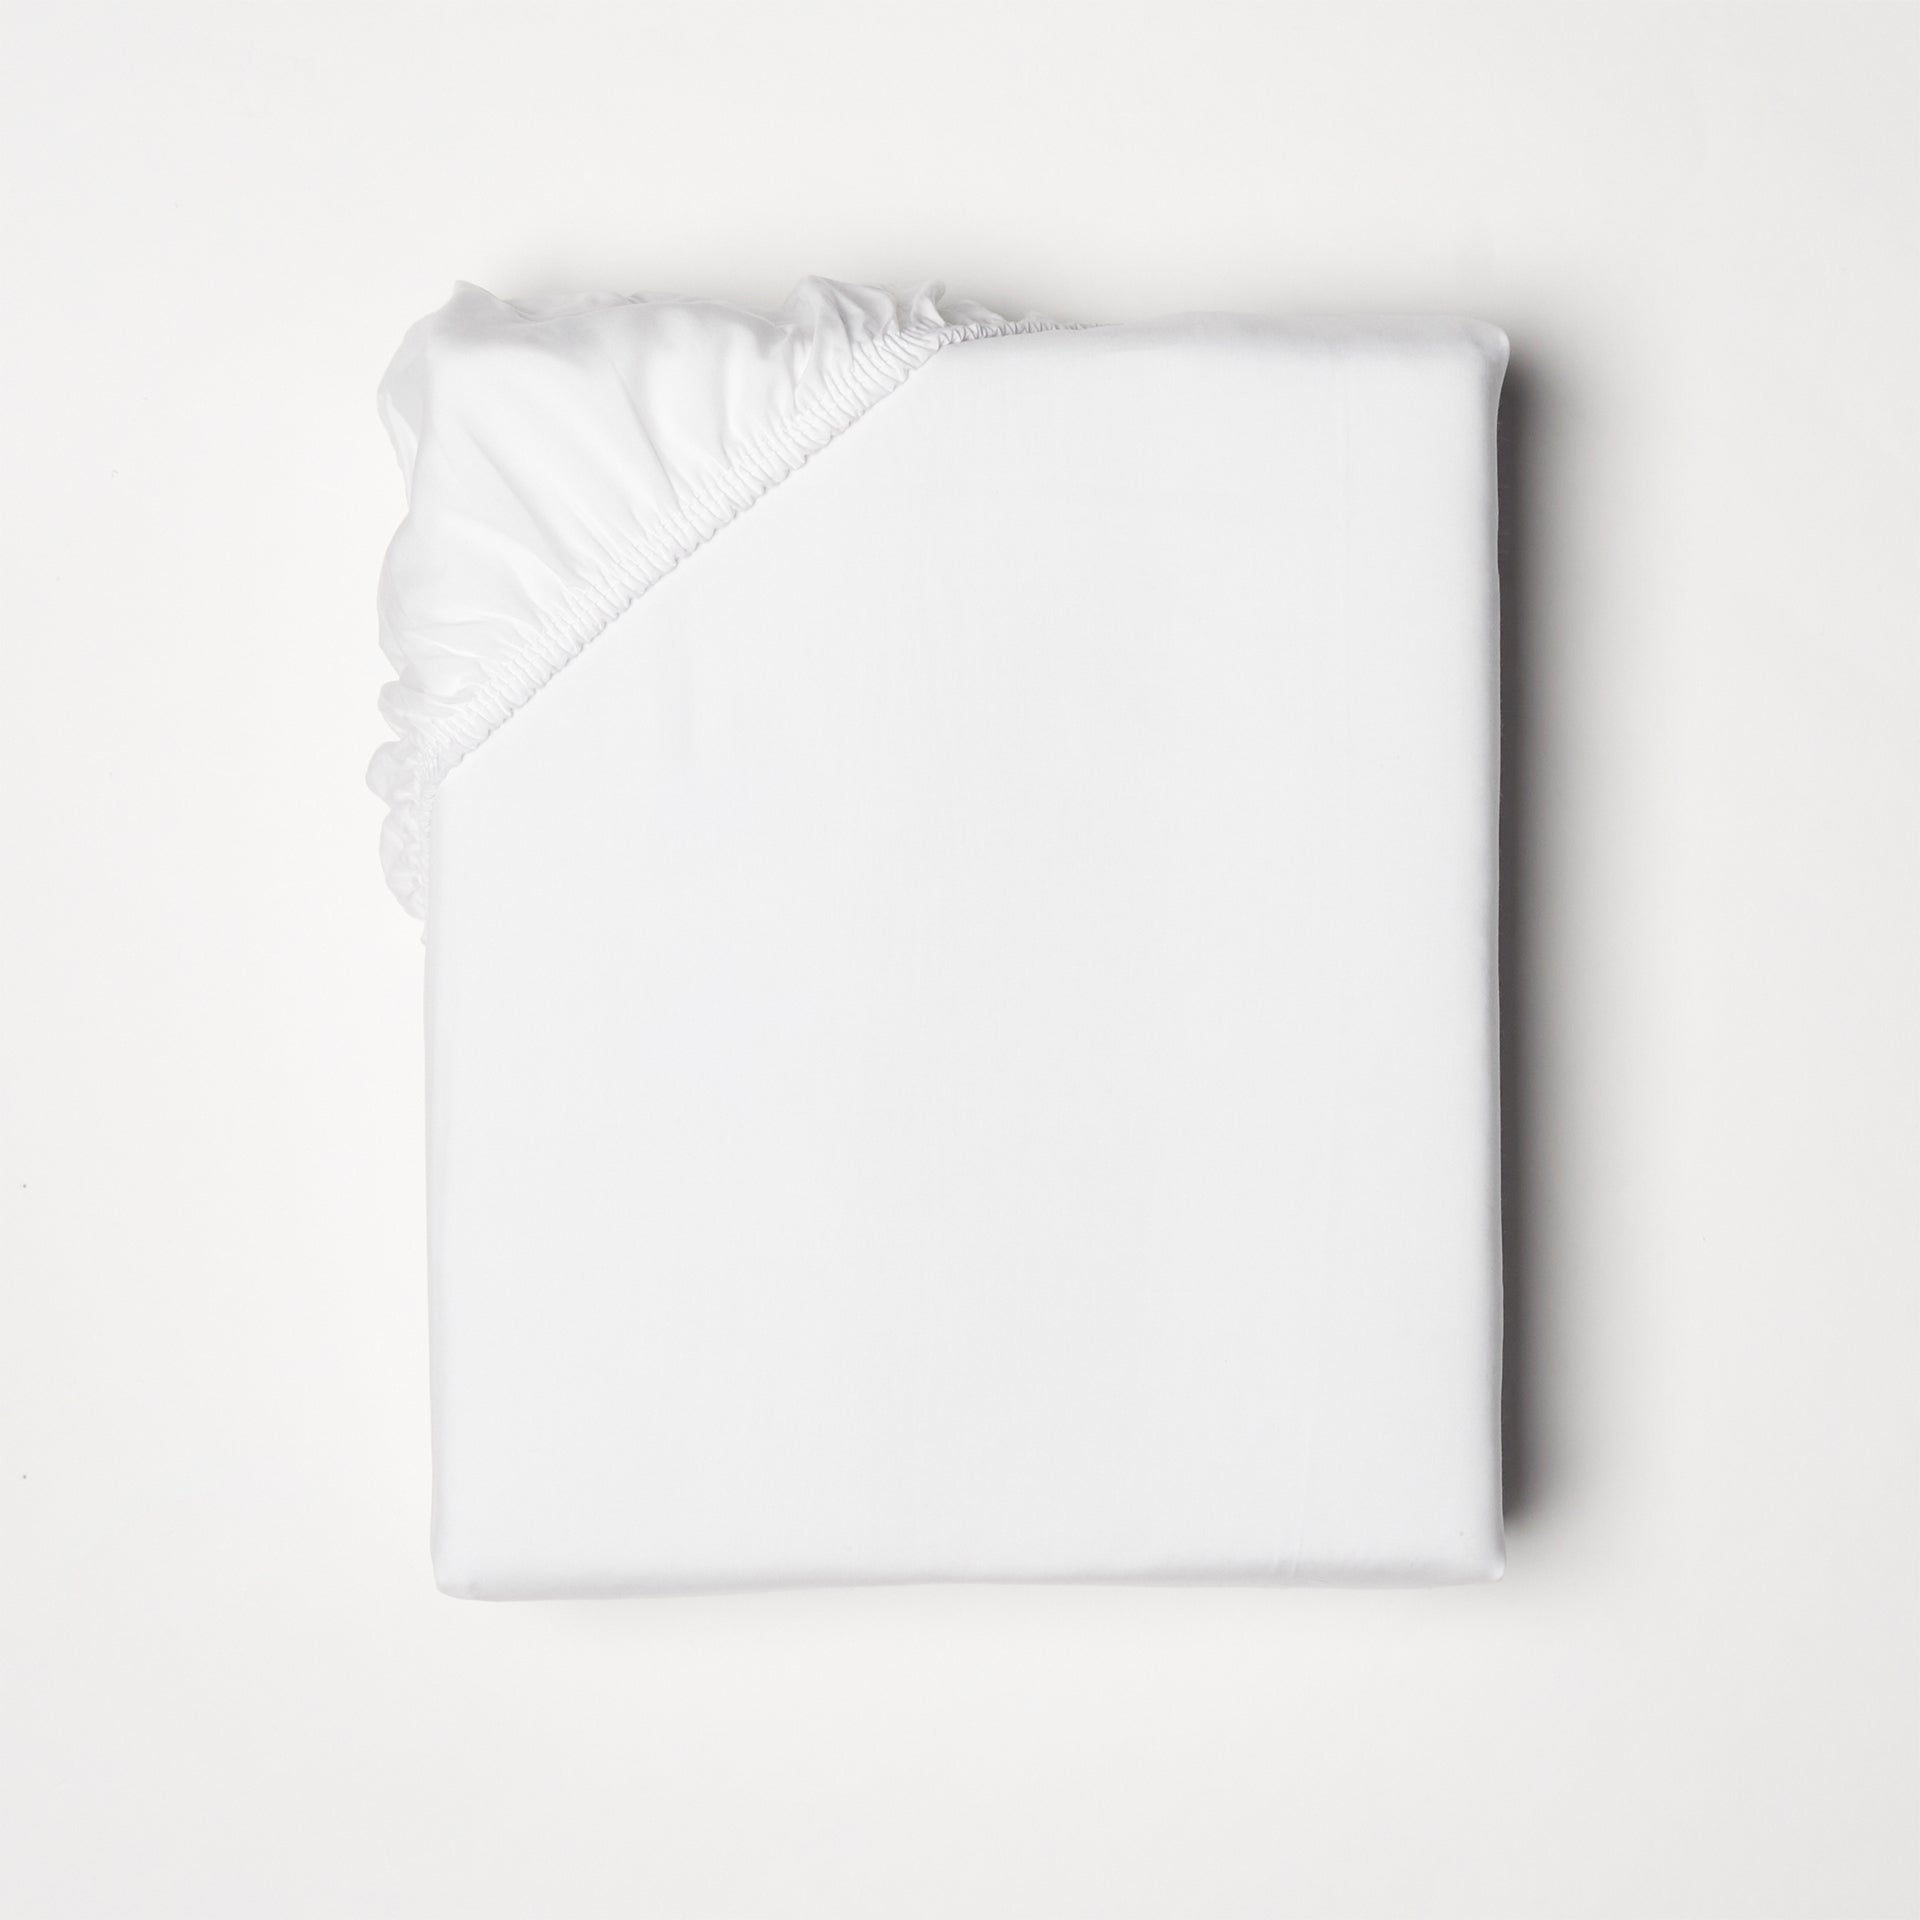 Fitted sheet offered in classic ivory and white, fits mattresses up to 18&quot; deep with a fitted elastic skirt 